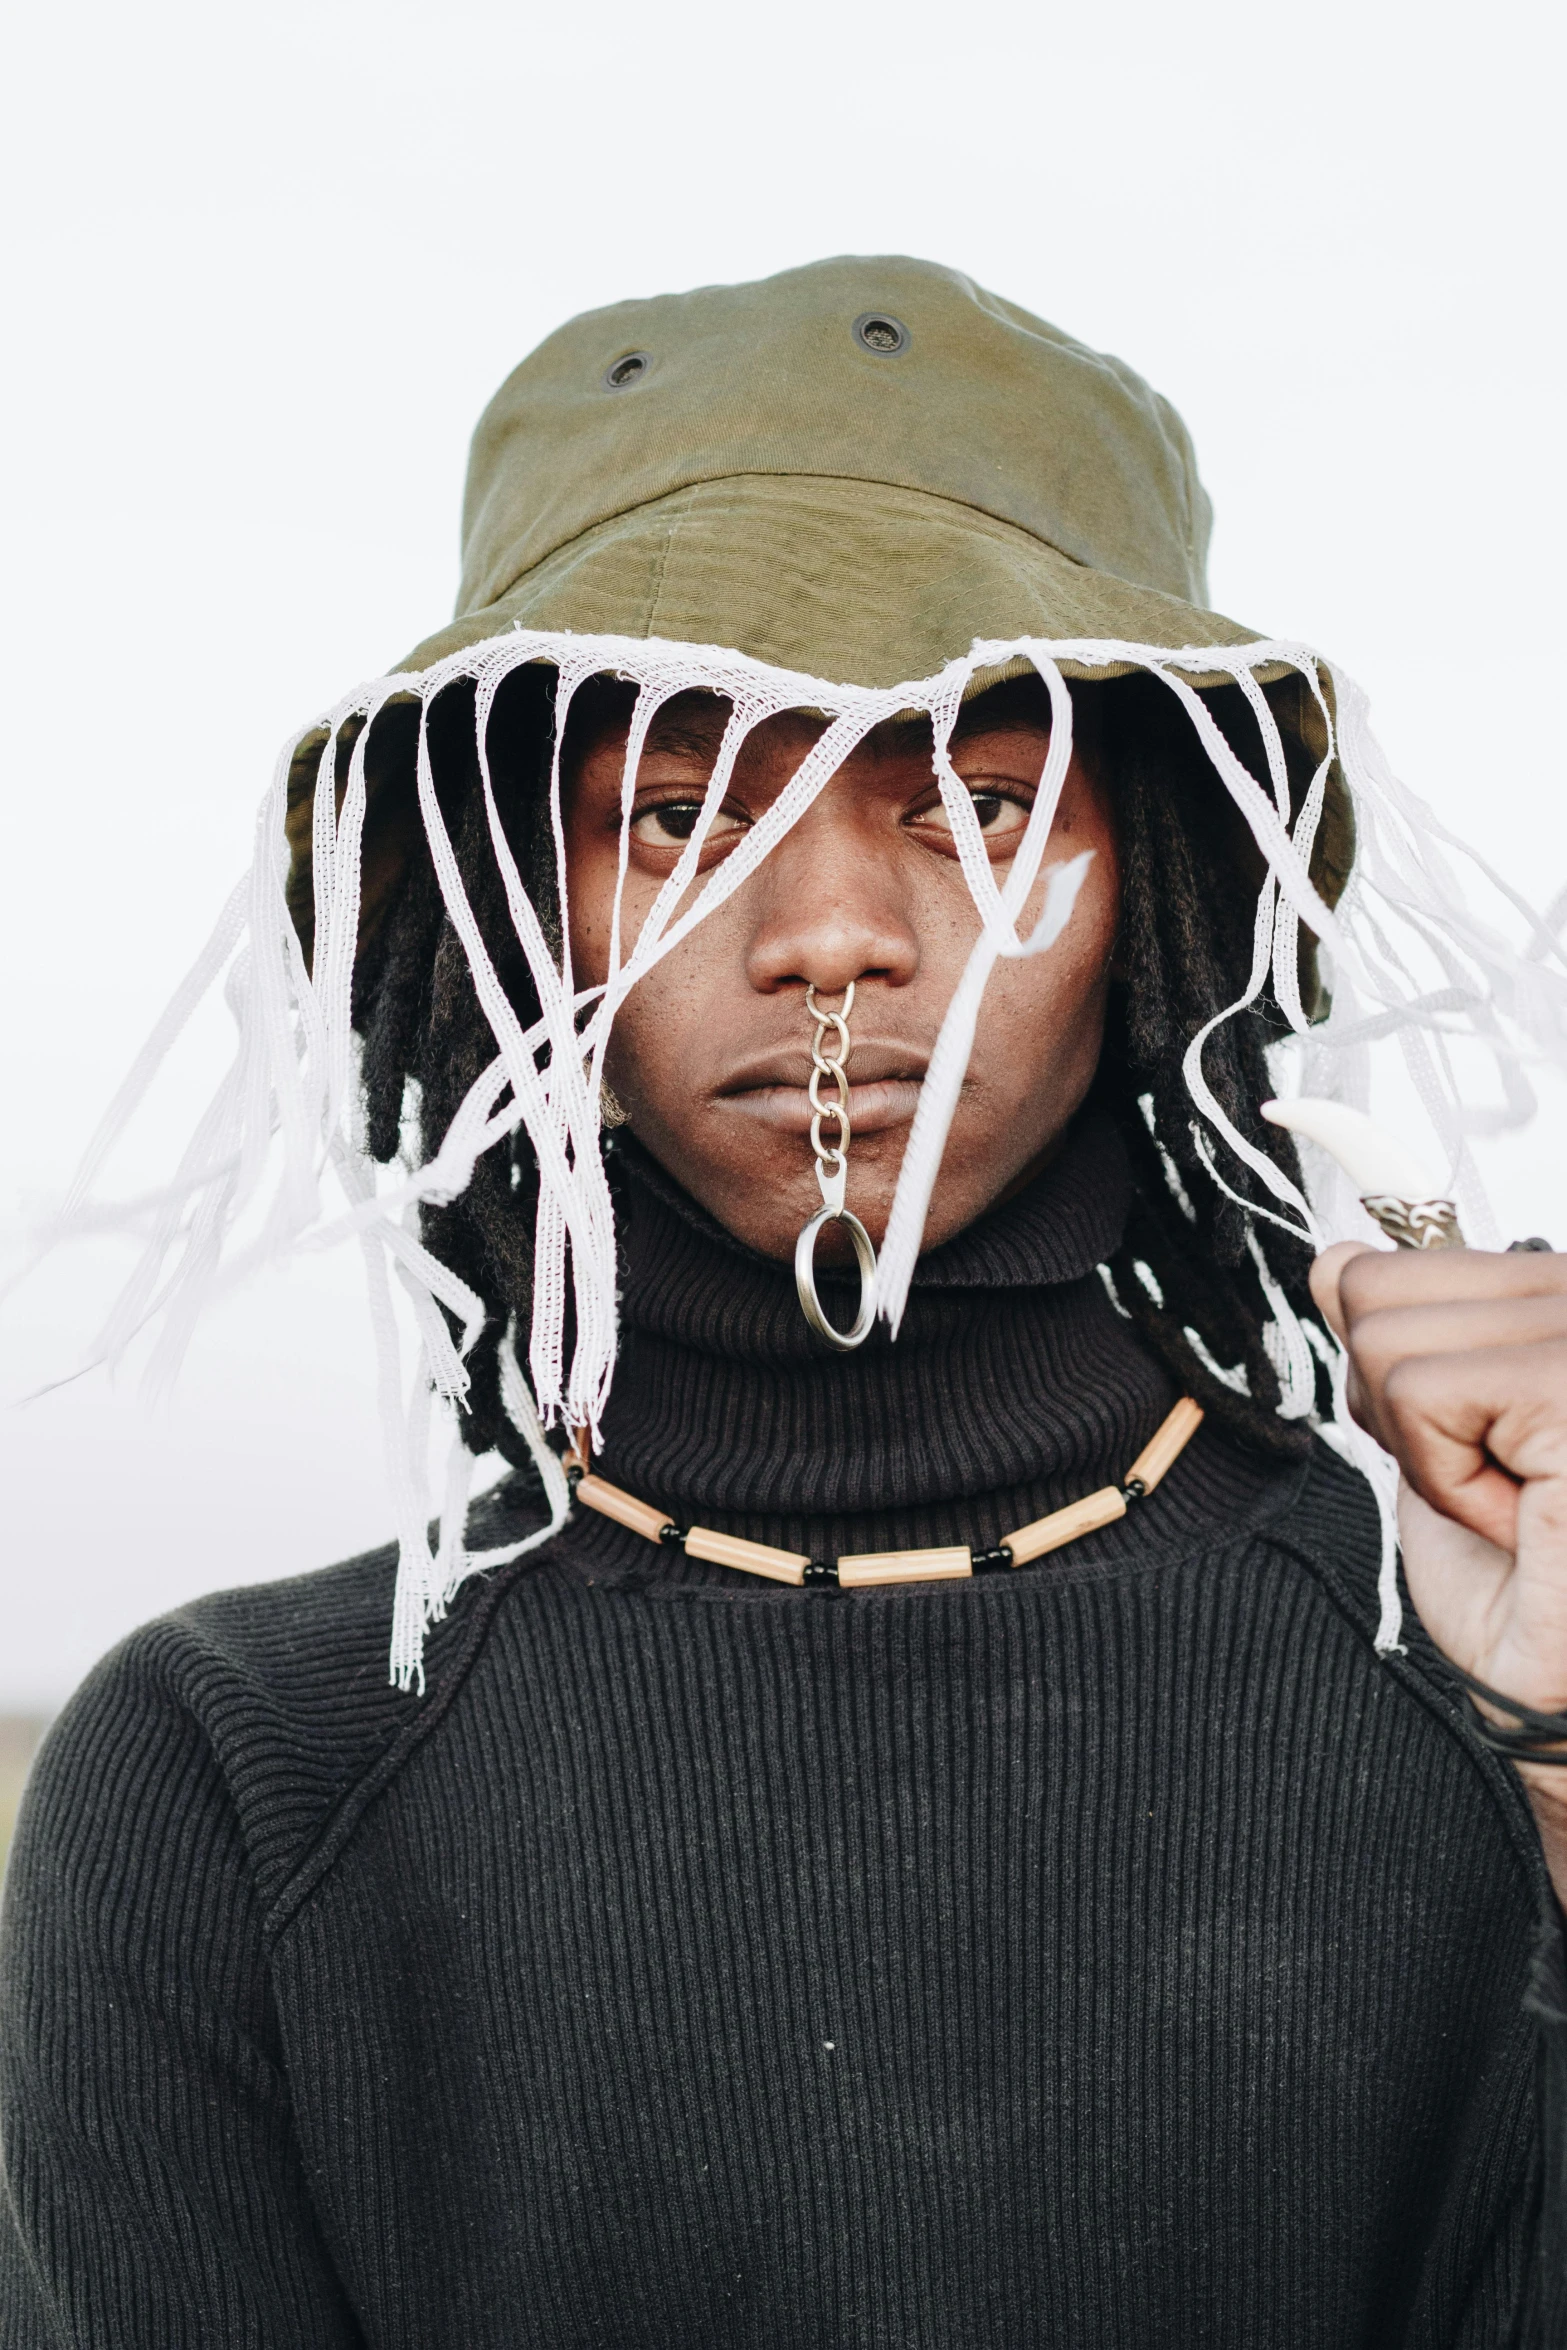 a close up of a person wearing a hat, trending on pexels, afrofuturism, ropes and chains, wearing turtleneck, torn clothing, rasta